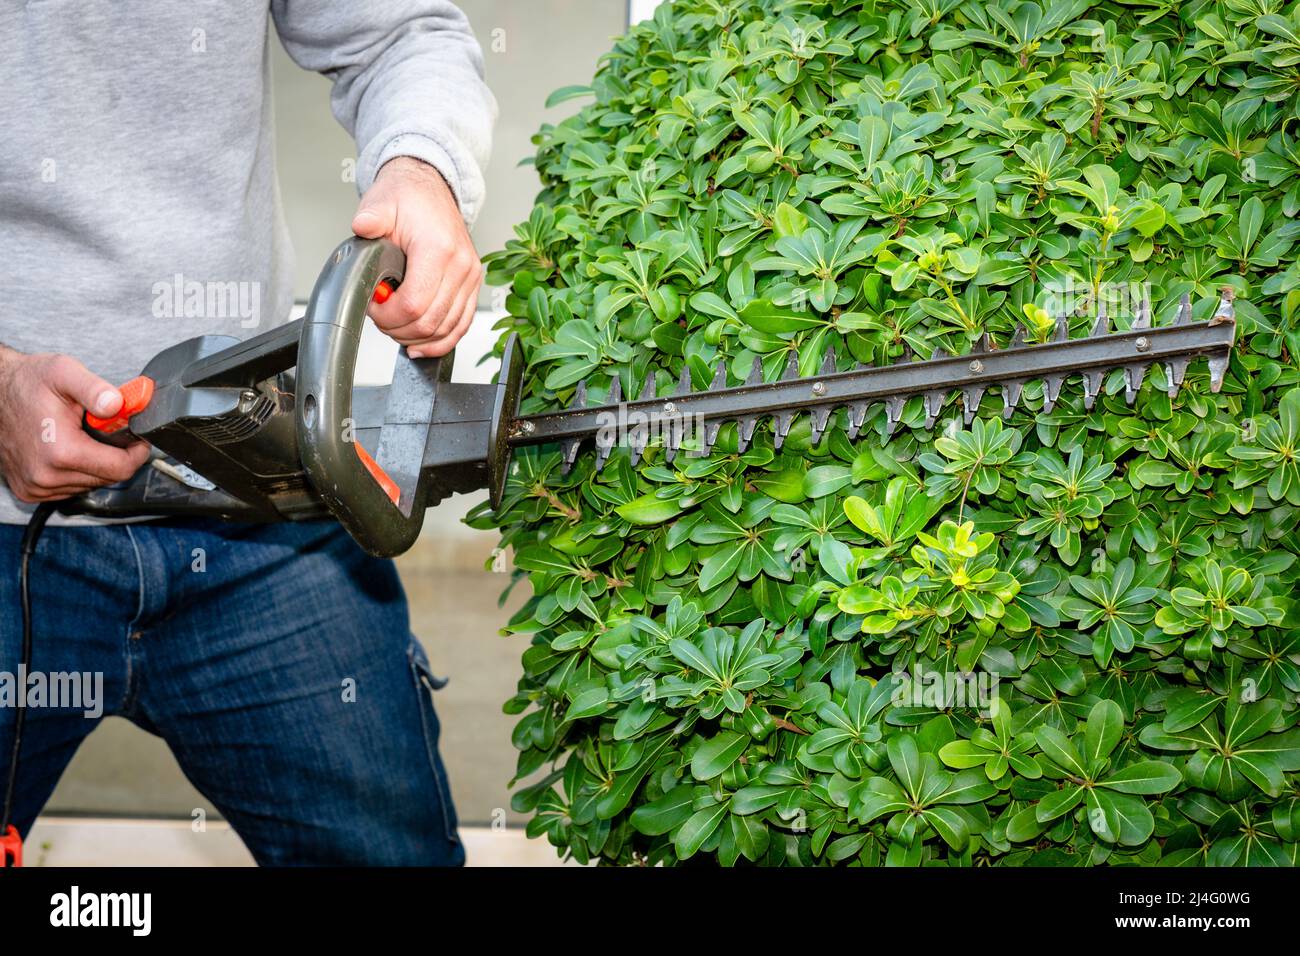 Gardener pruning branches of overgrown taflan plant with electric mower. Spring, gardening, landscape design concept. Stock Photo